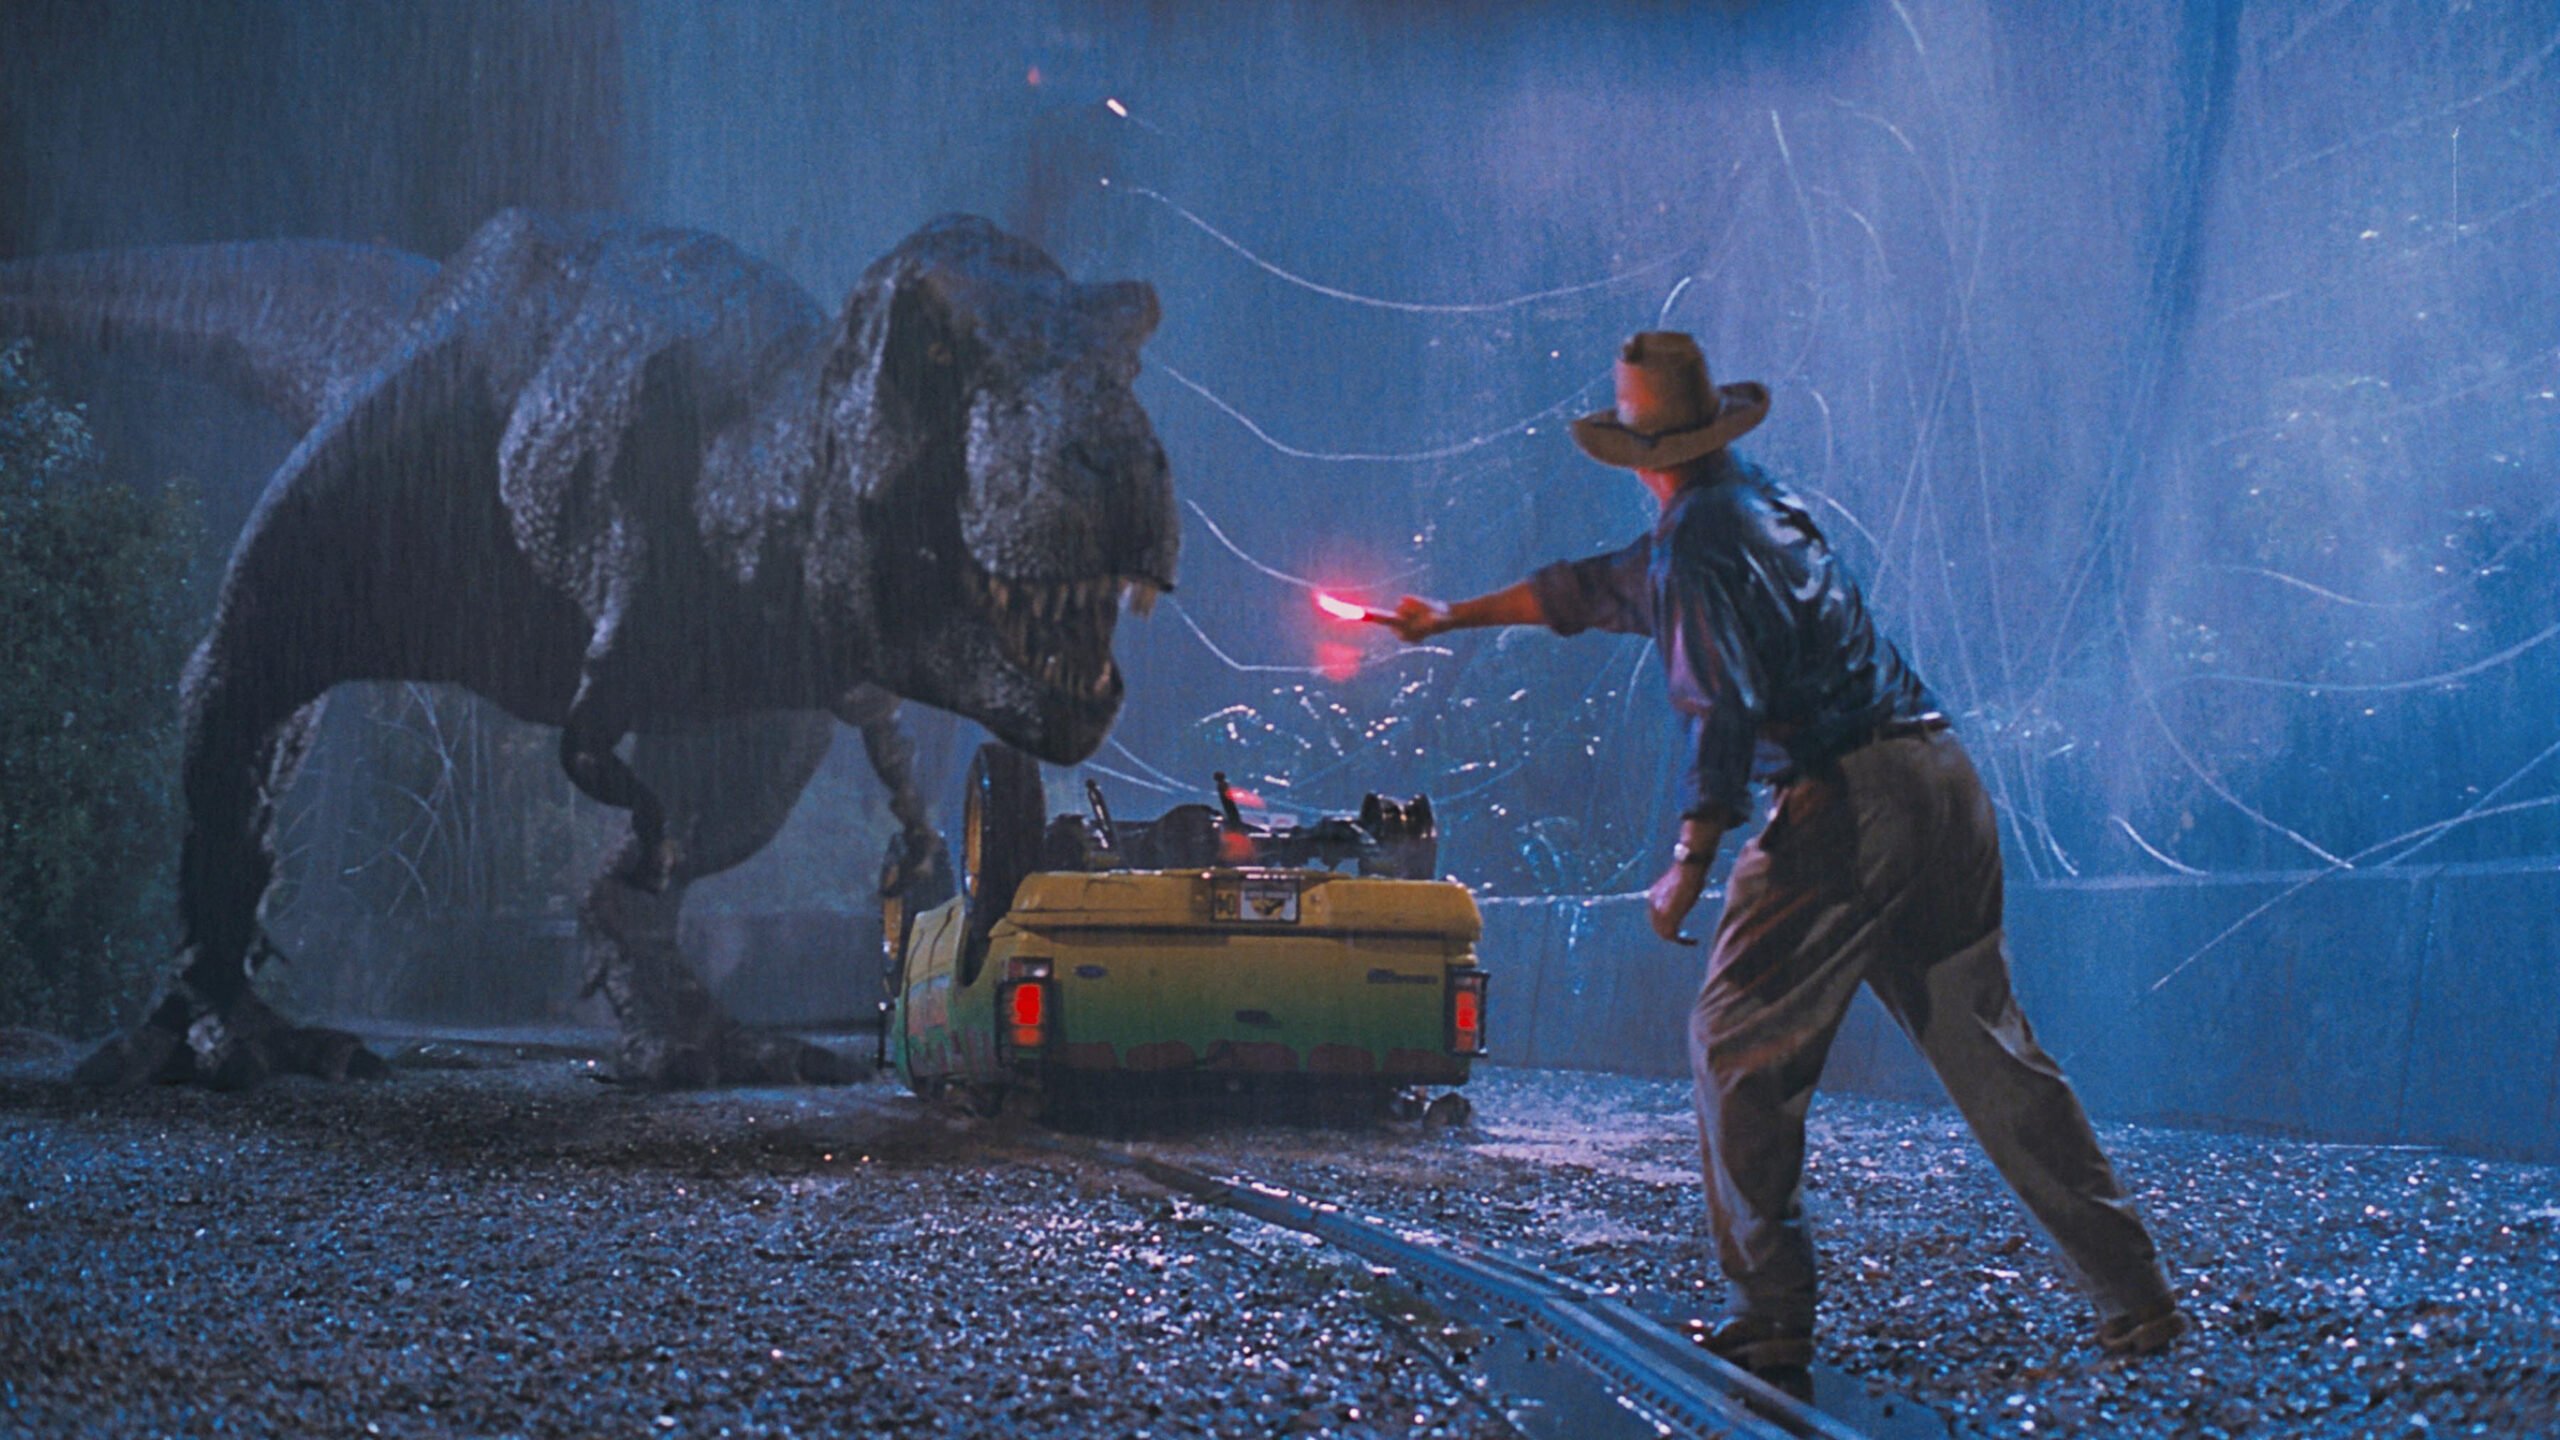 Dr. Grant waving a flare at the T-Rex in Jurassic Park.